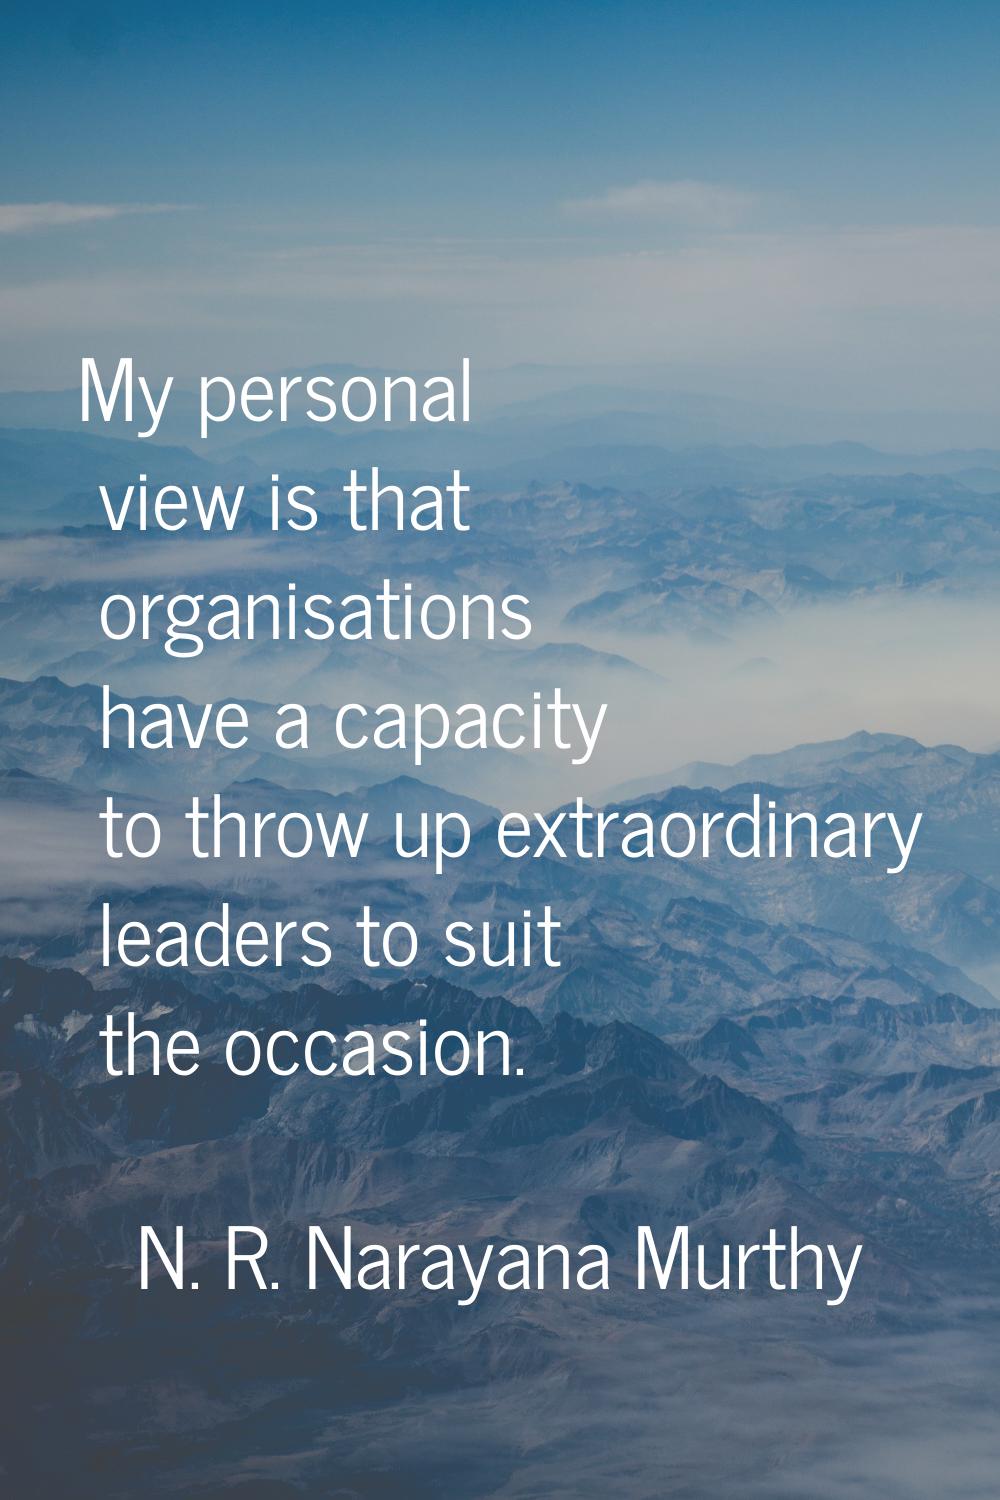 My personal view is that organisations have a capacity to throw up extraordinary leaders to suit th